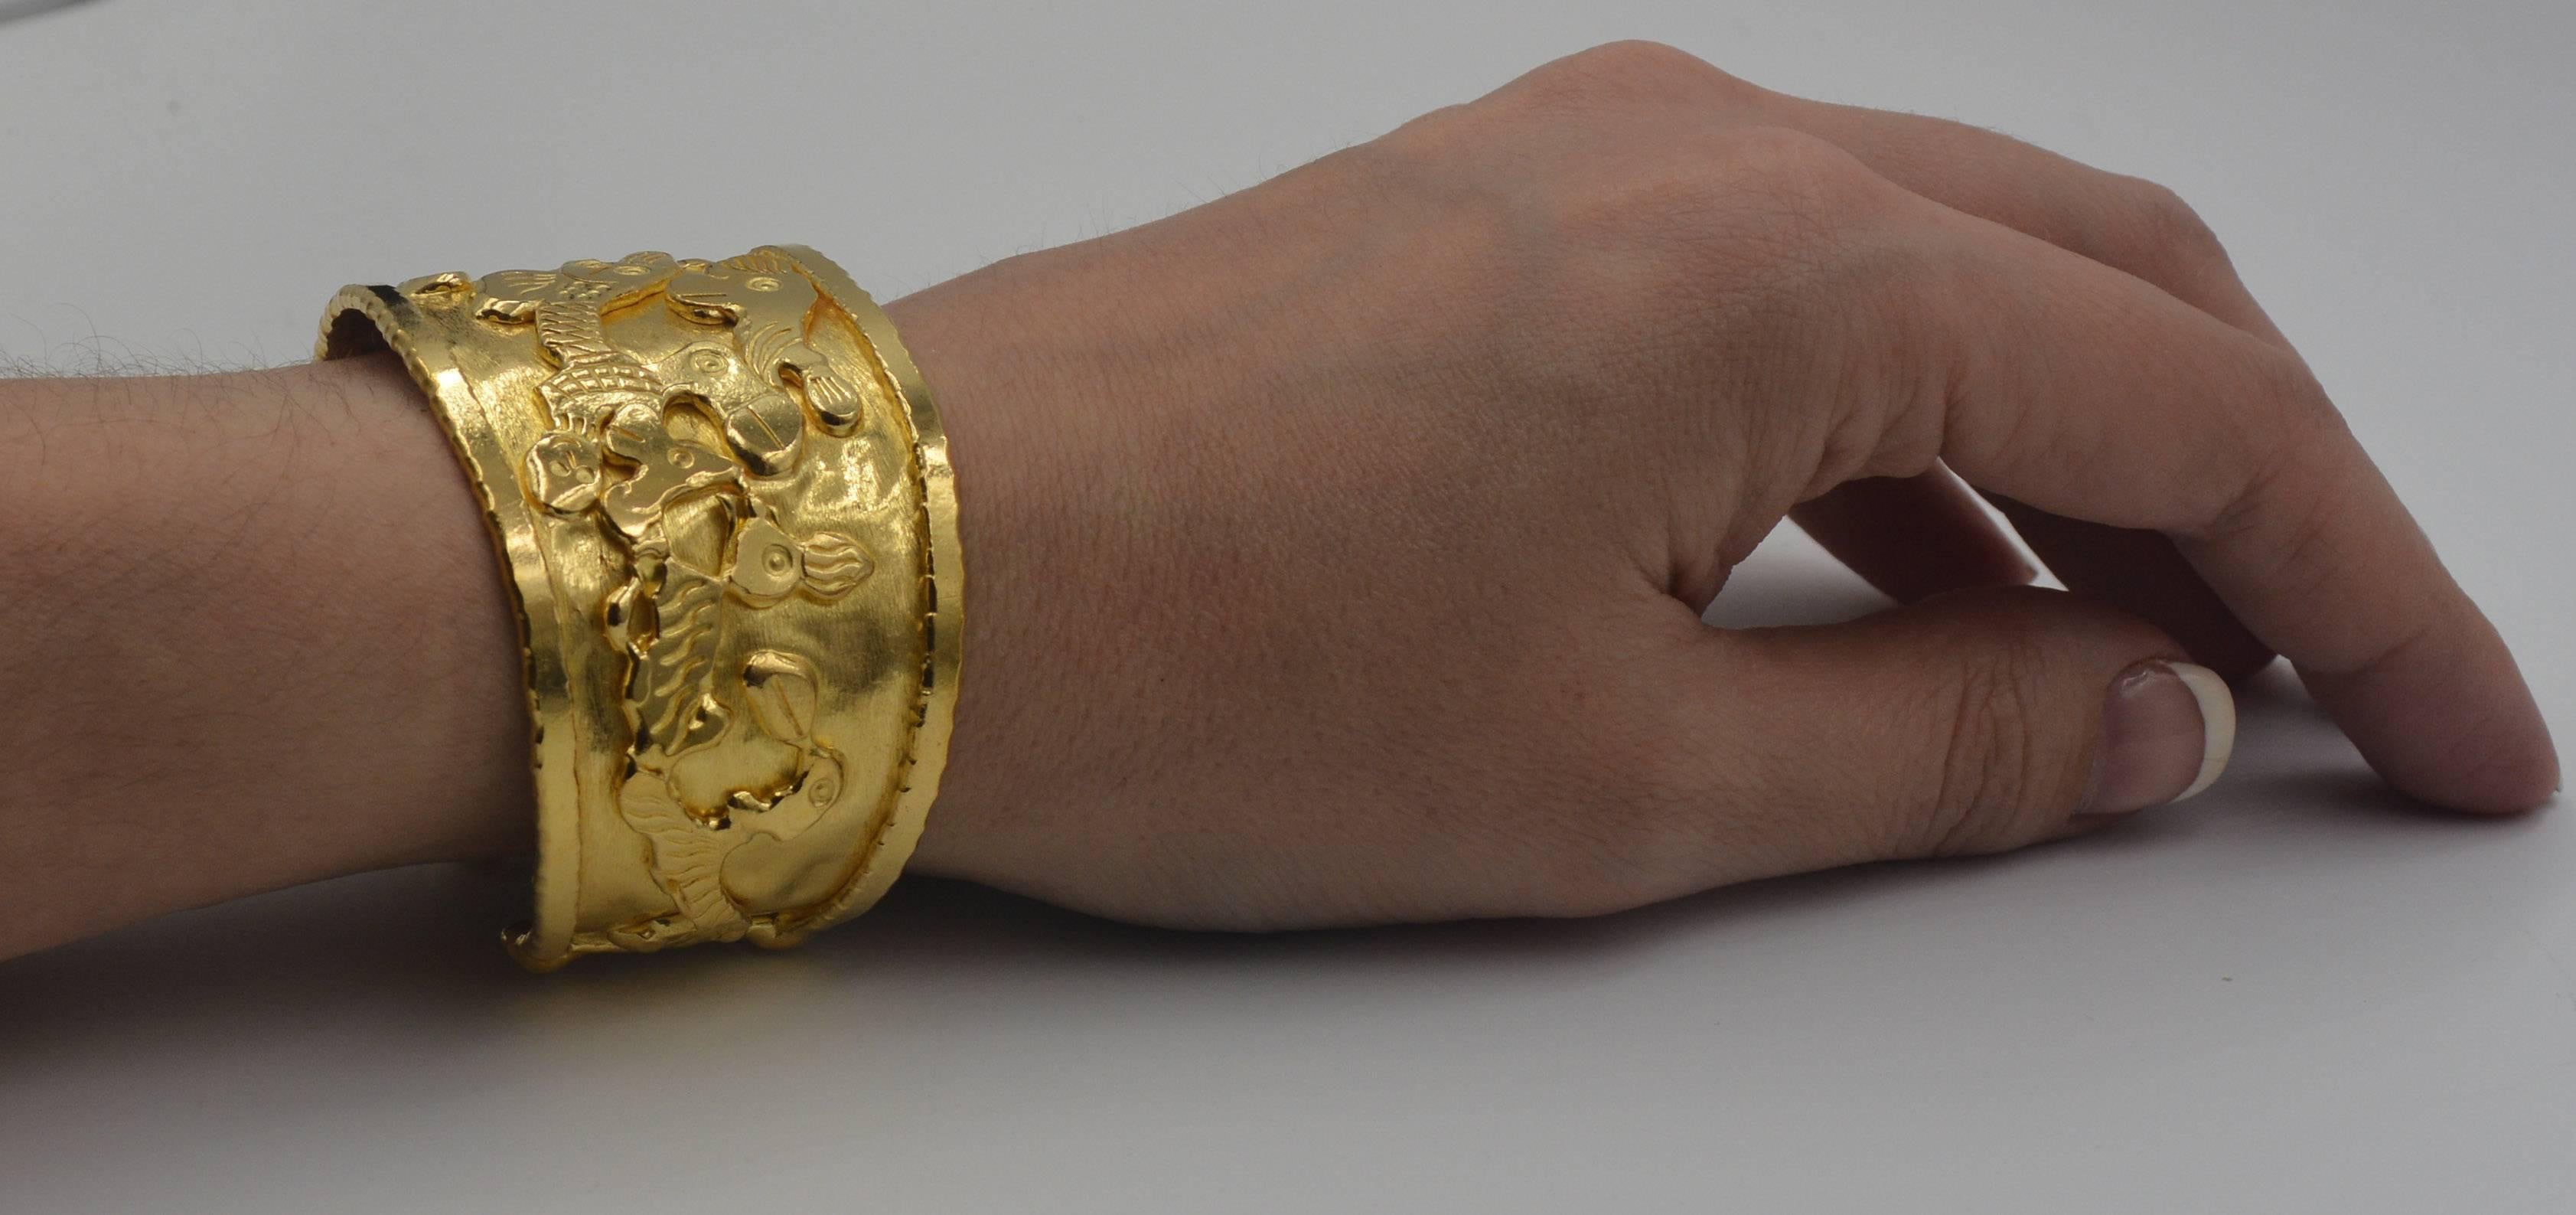 With an eye catching gold bracelet like this gold cuff, people are sure to notice, especially when it's this unique and sought after Jean Mahie 22 karat gold Charming Monsters cuff bracelet. This gold cuff bracelet is an impressive 1 and 7/16th